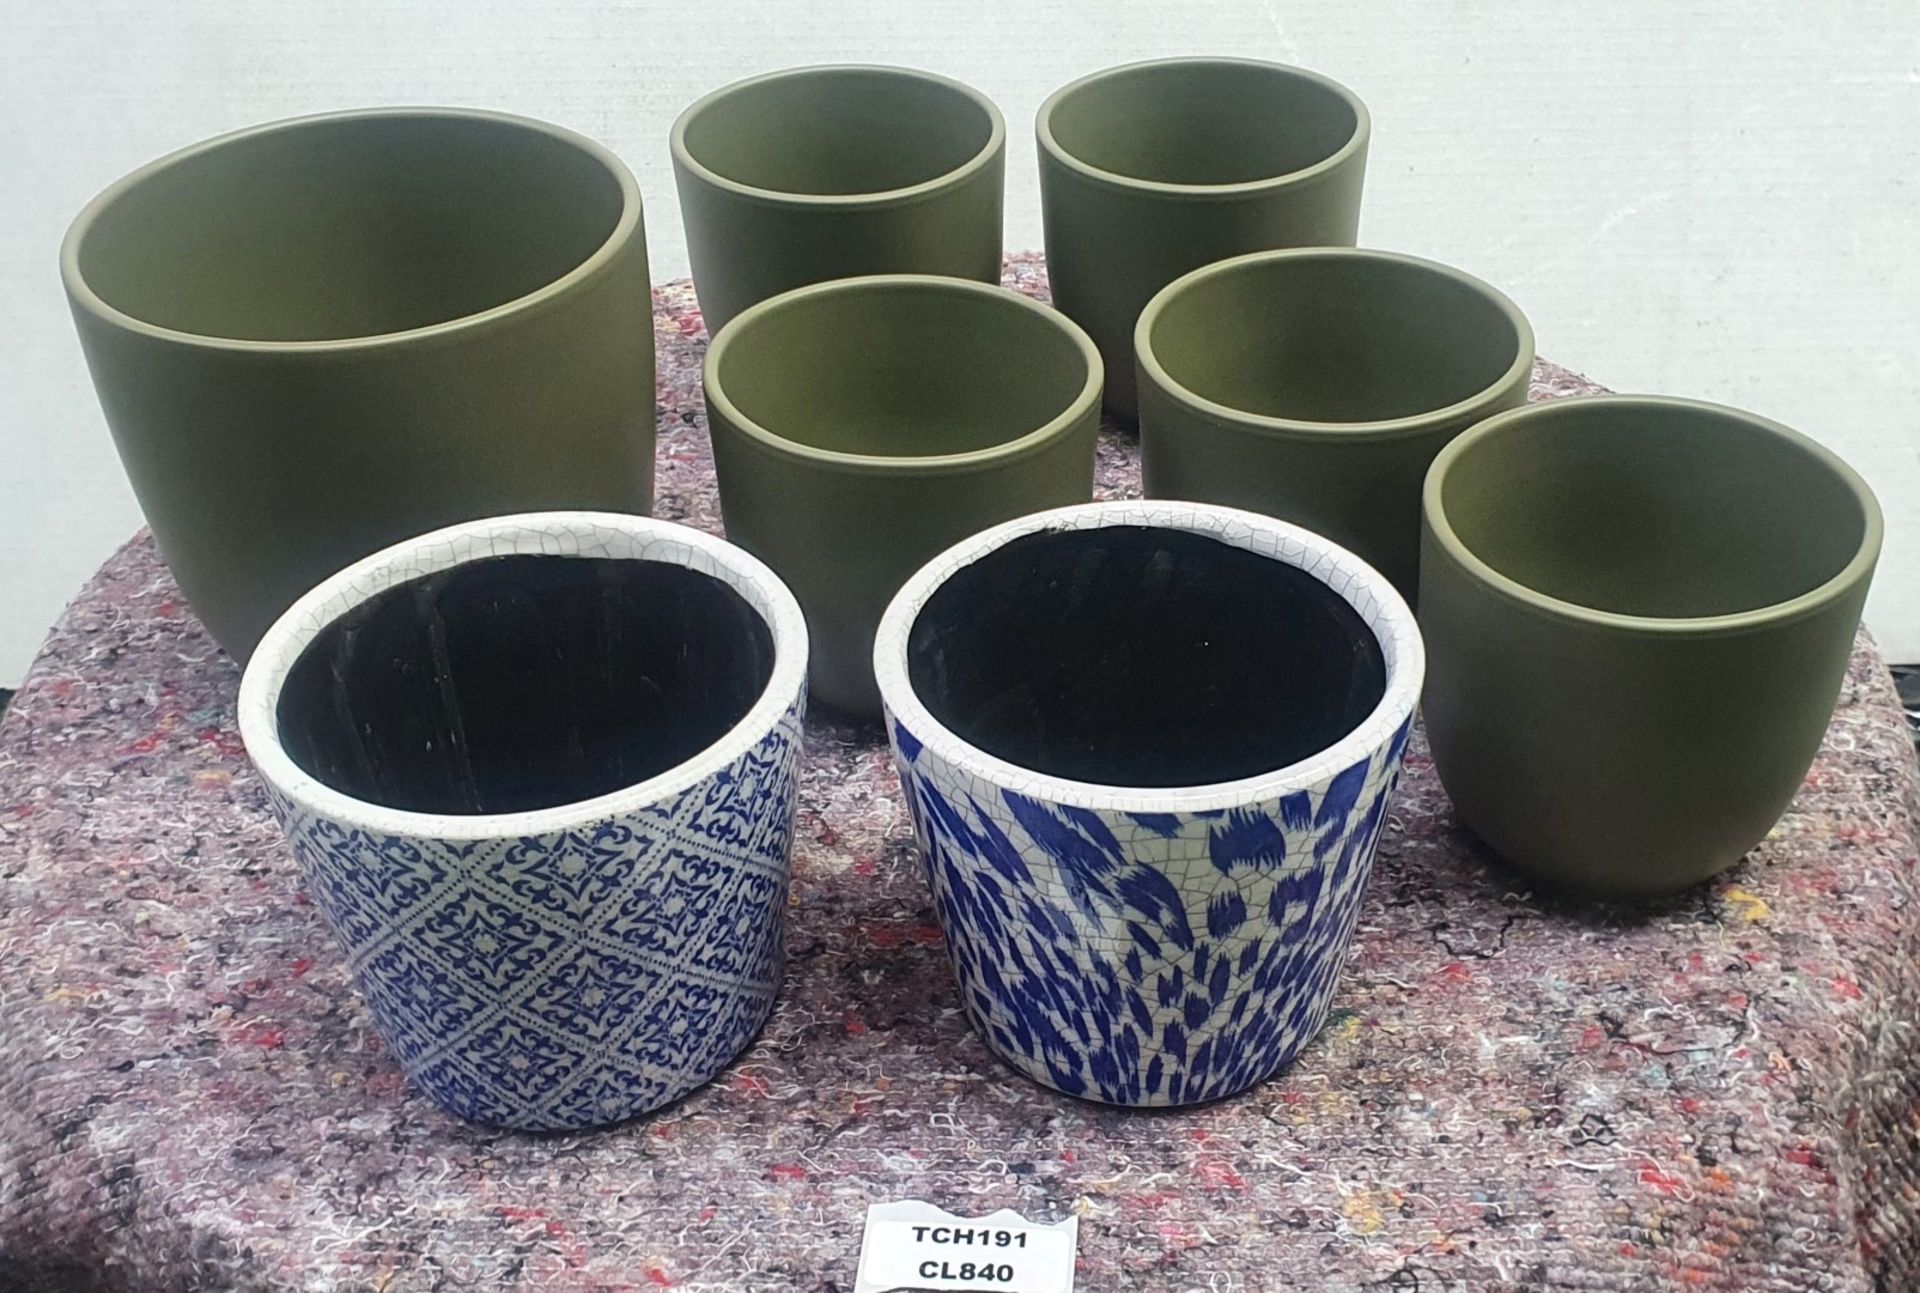 9 x Assorted Plant Pots Including - Includes Vintage and Contemporary Styles - New Stock - Ref: - Image 10 of 11